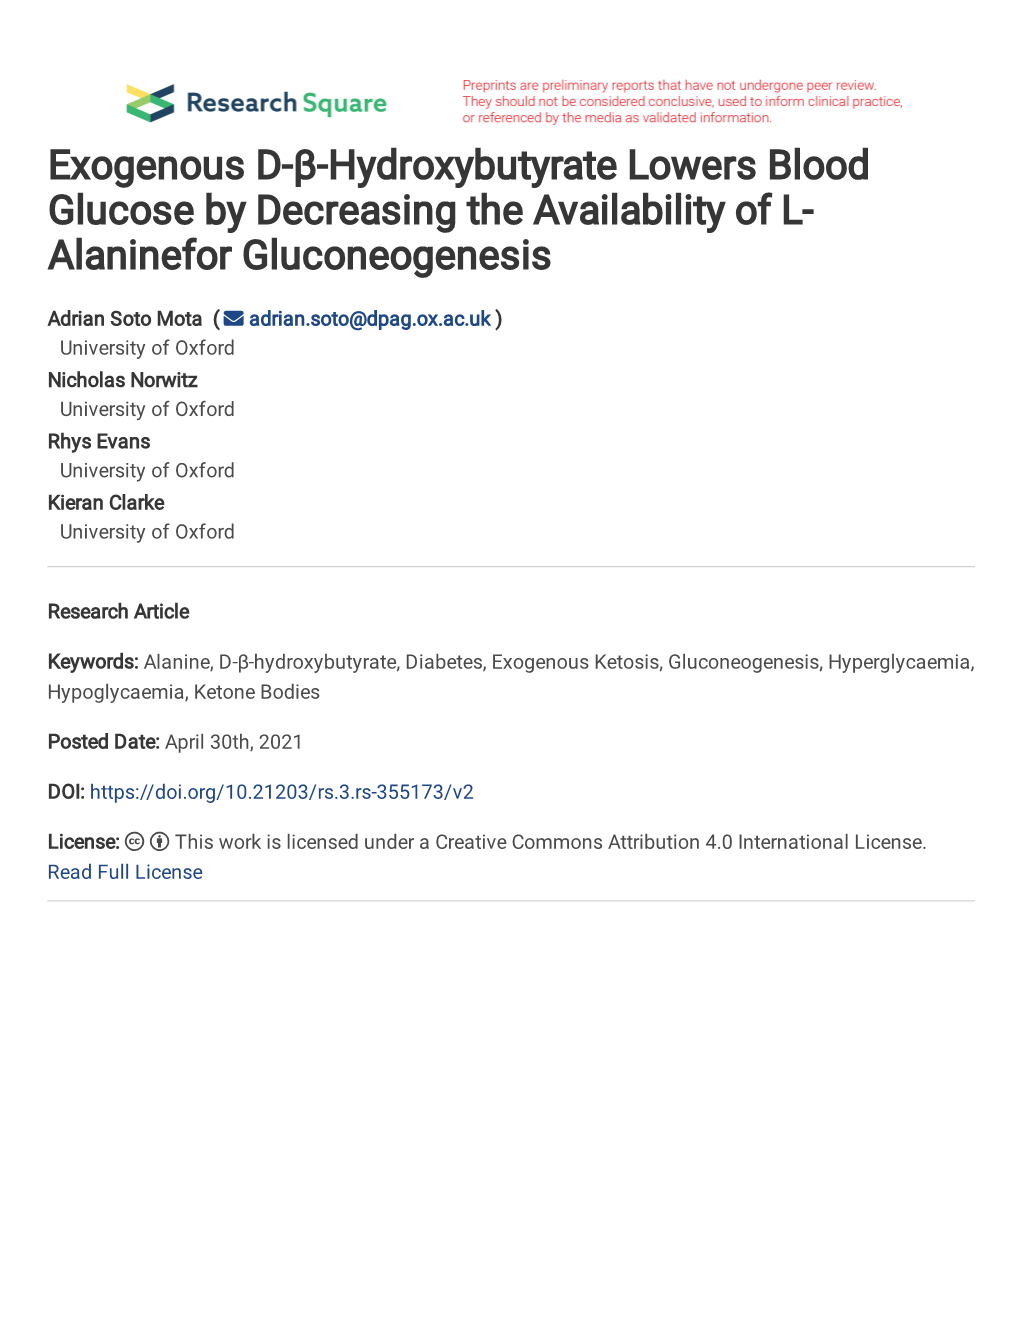 Exogenous D-Β-Hydroxybutyrate Lowers Blood Glucose by Decreasing the Availability of L- Alaninefor Gluconeogenesis